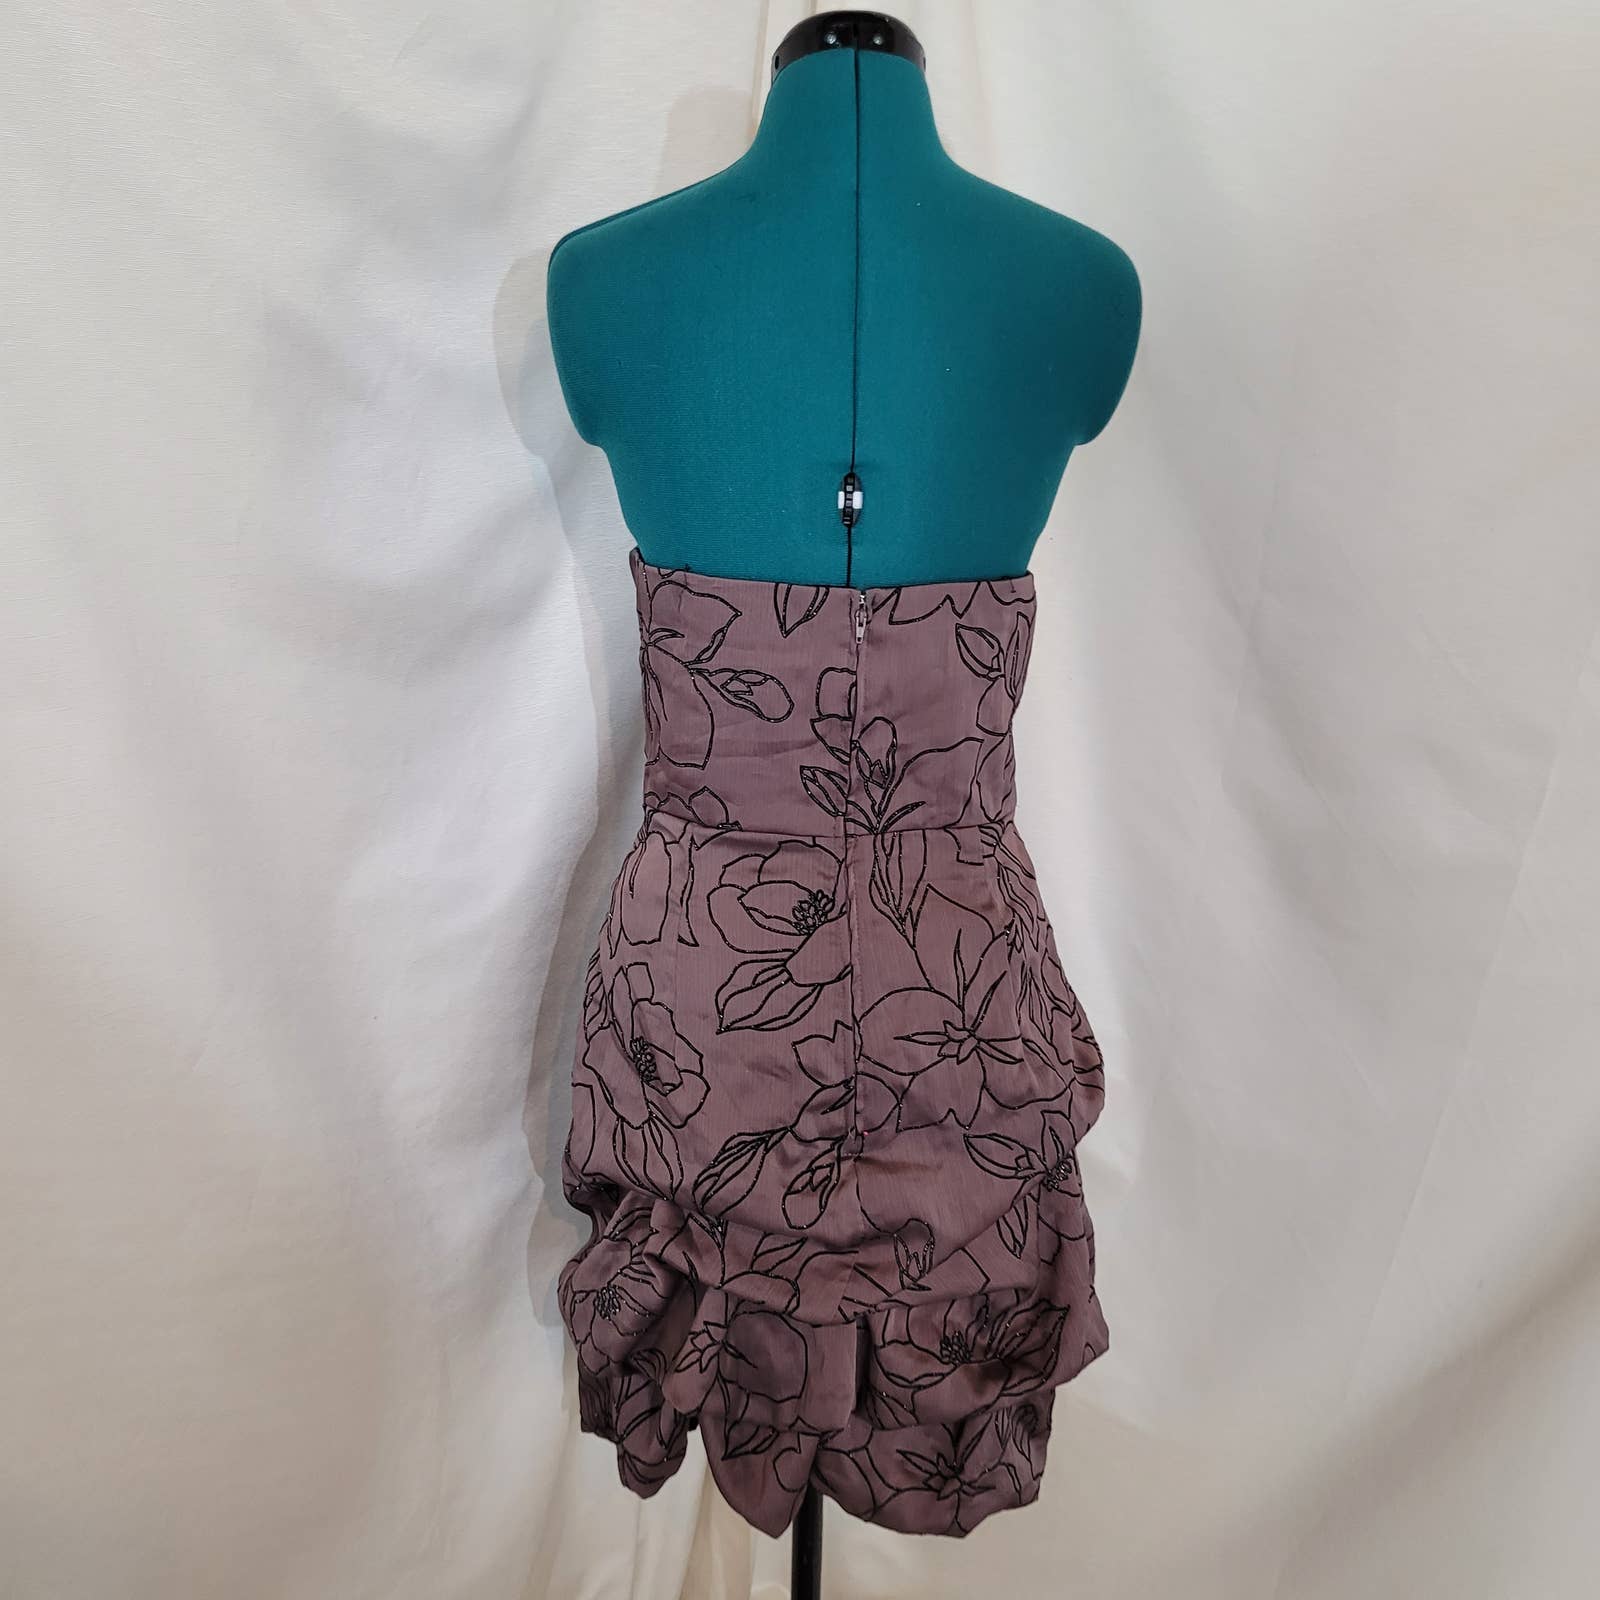 Le Chateau Brown Floral Strapless Sparkly Dress - Size LargeMarkita's Closetle chateau